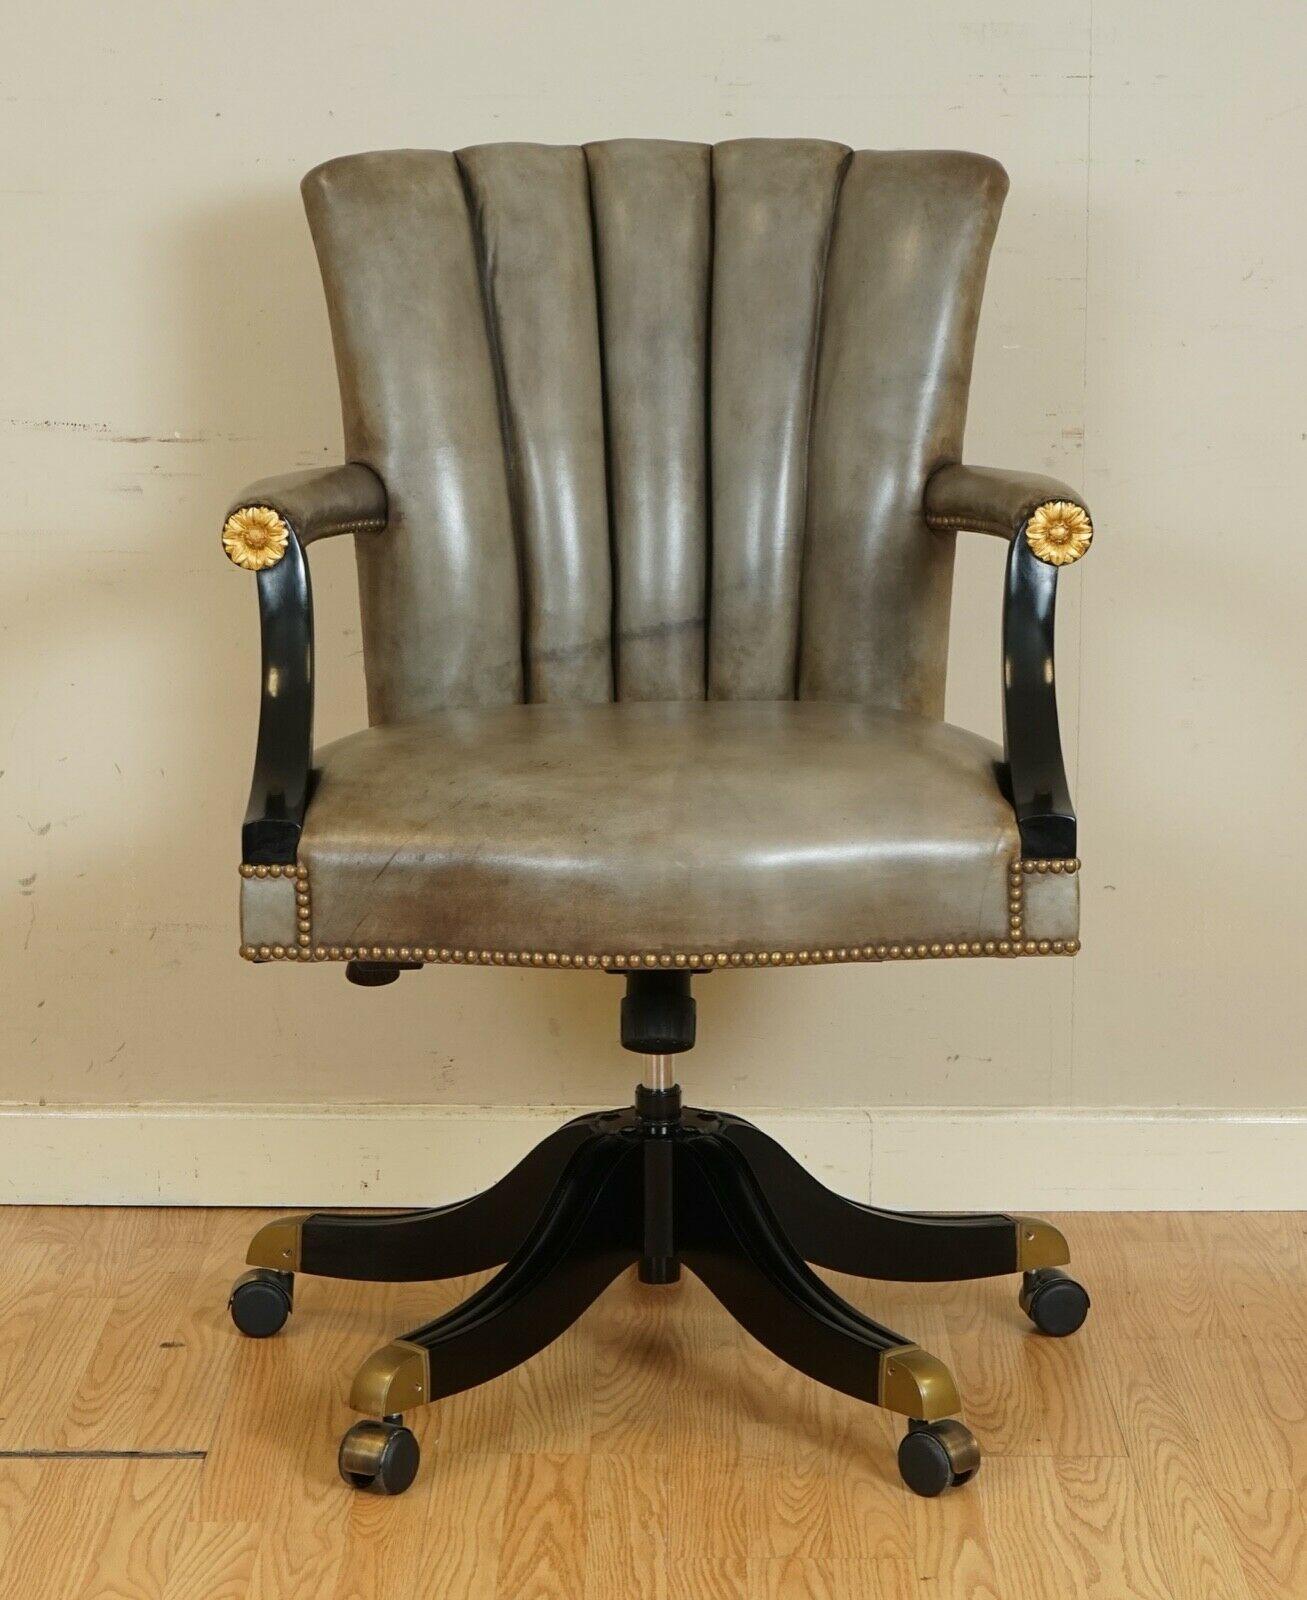 We are delighted to offer for sale this stunning vintage Art Deco shell back leather swivel chair.
A very well made and comfortable chair. The armrest and base are black Lacquered with a gold design in front of the armrest.

These are quite rare